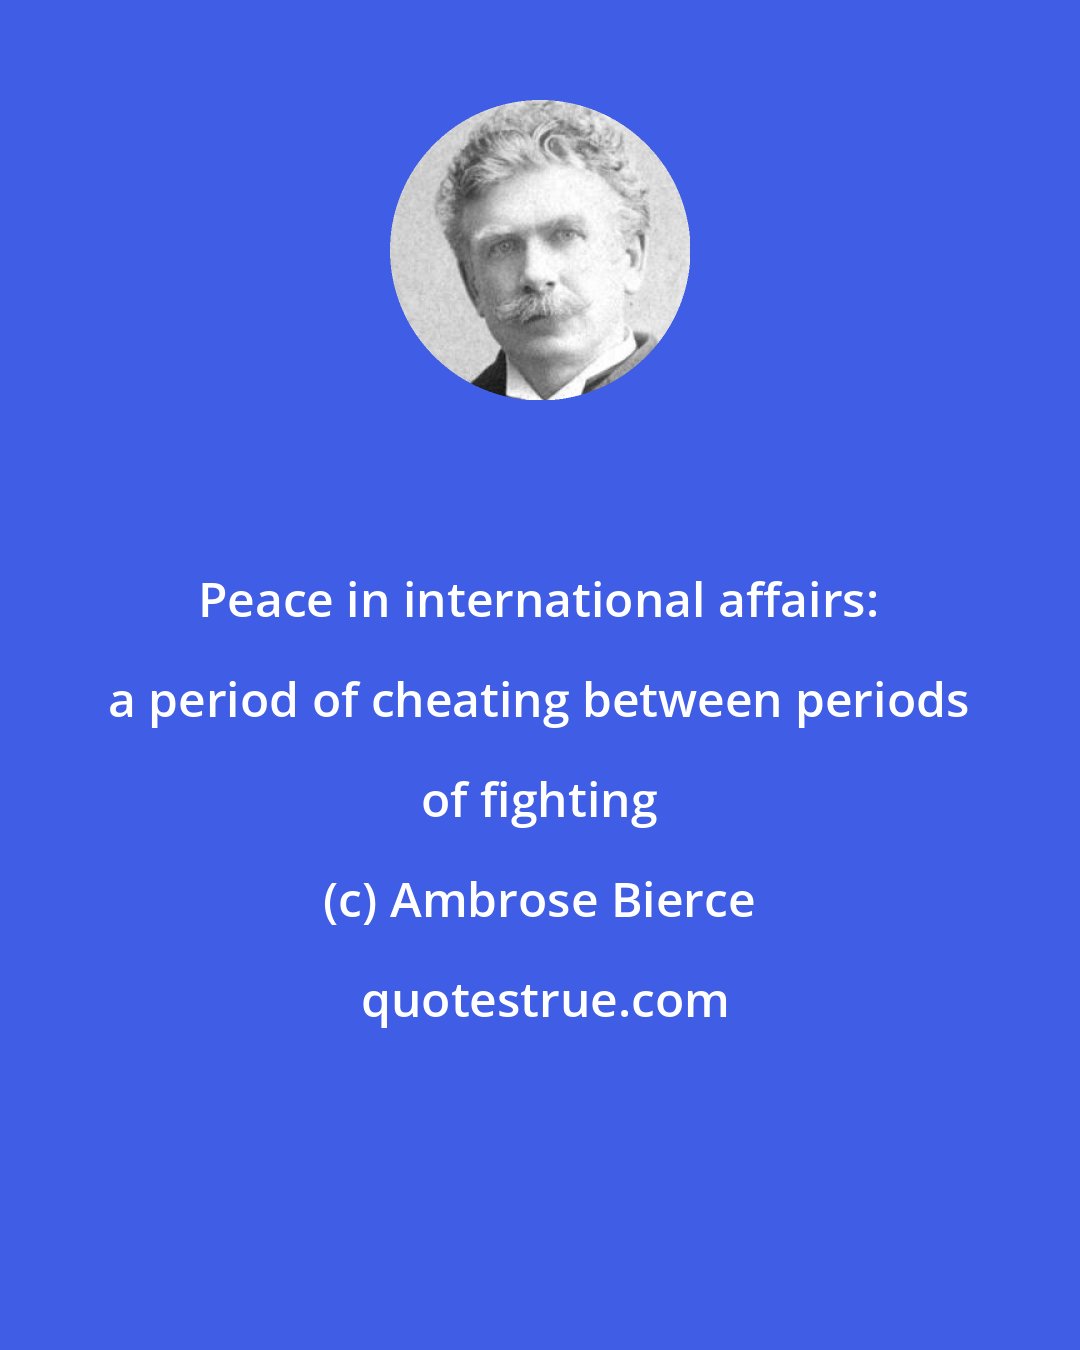 Ambrose Bierce: Peace in international affairs: a period of cheating between periods of fighting